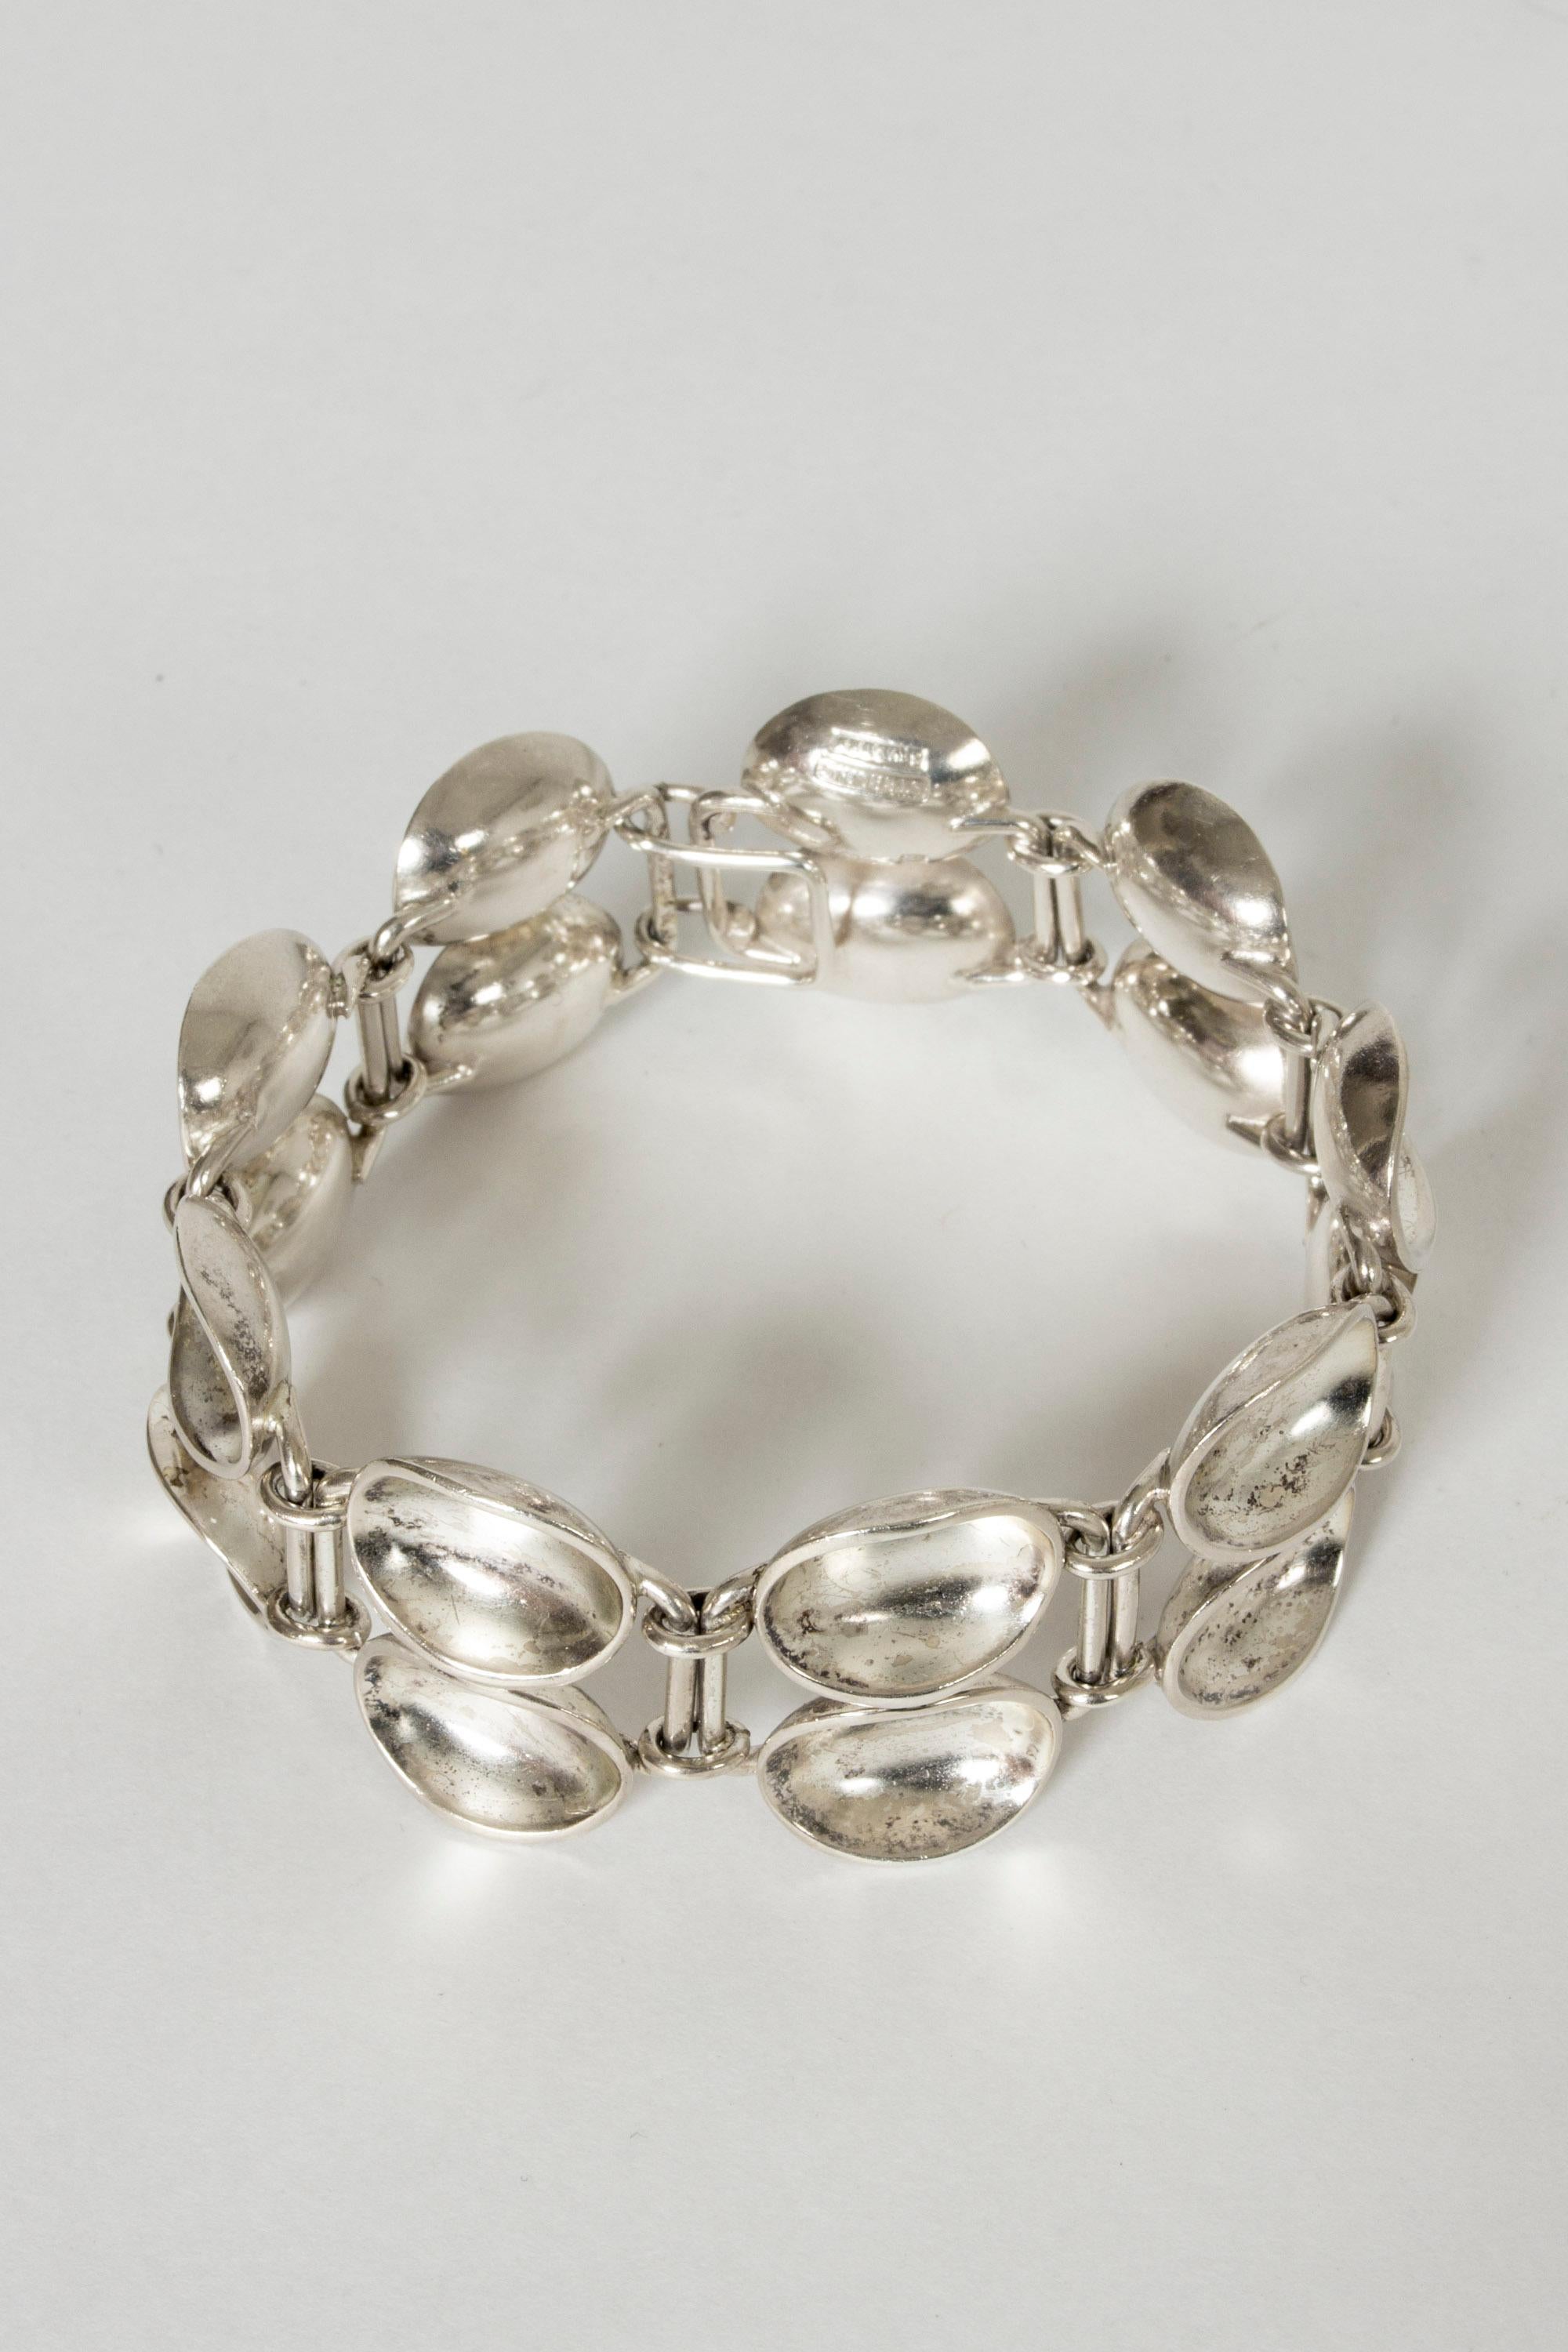 Stunning silver bracelet by Sigurd Persson, from the “Bowls” series. Luxurious design, feels great on the wrist.